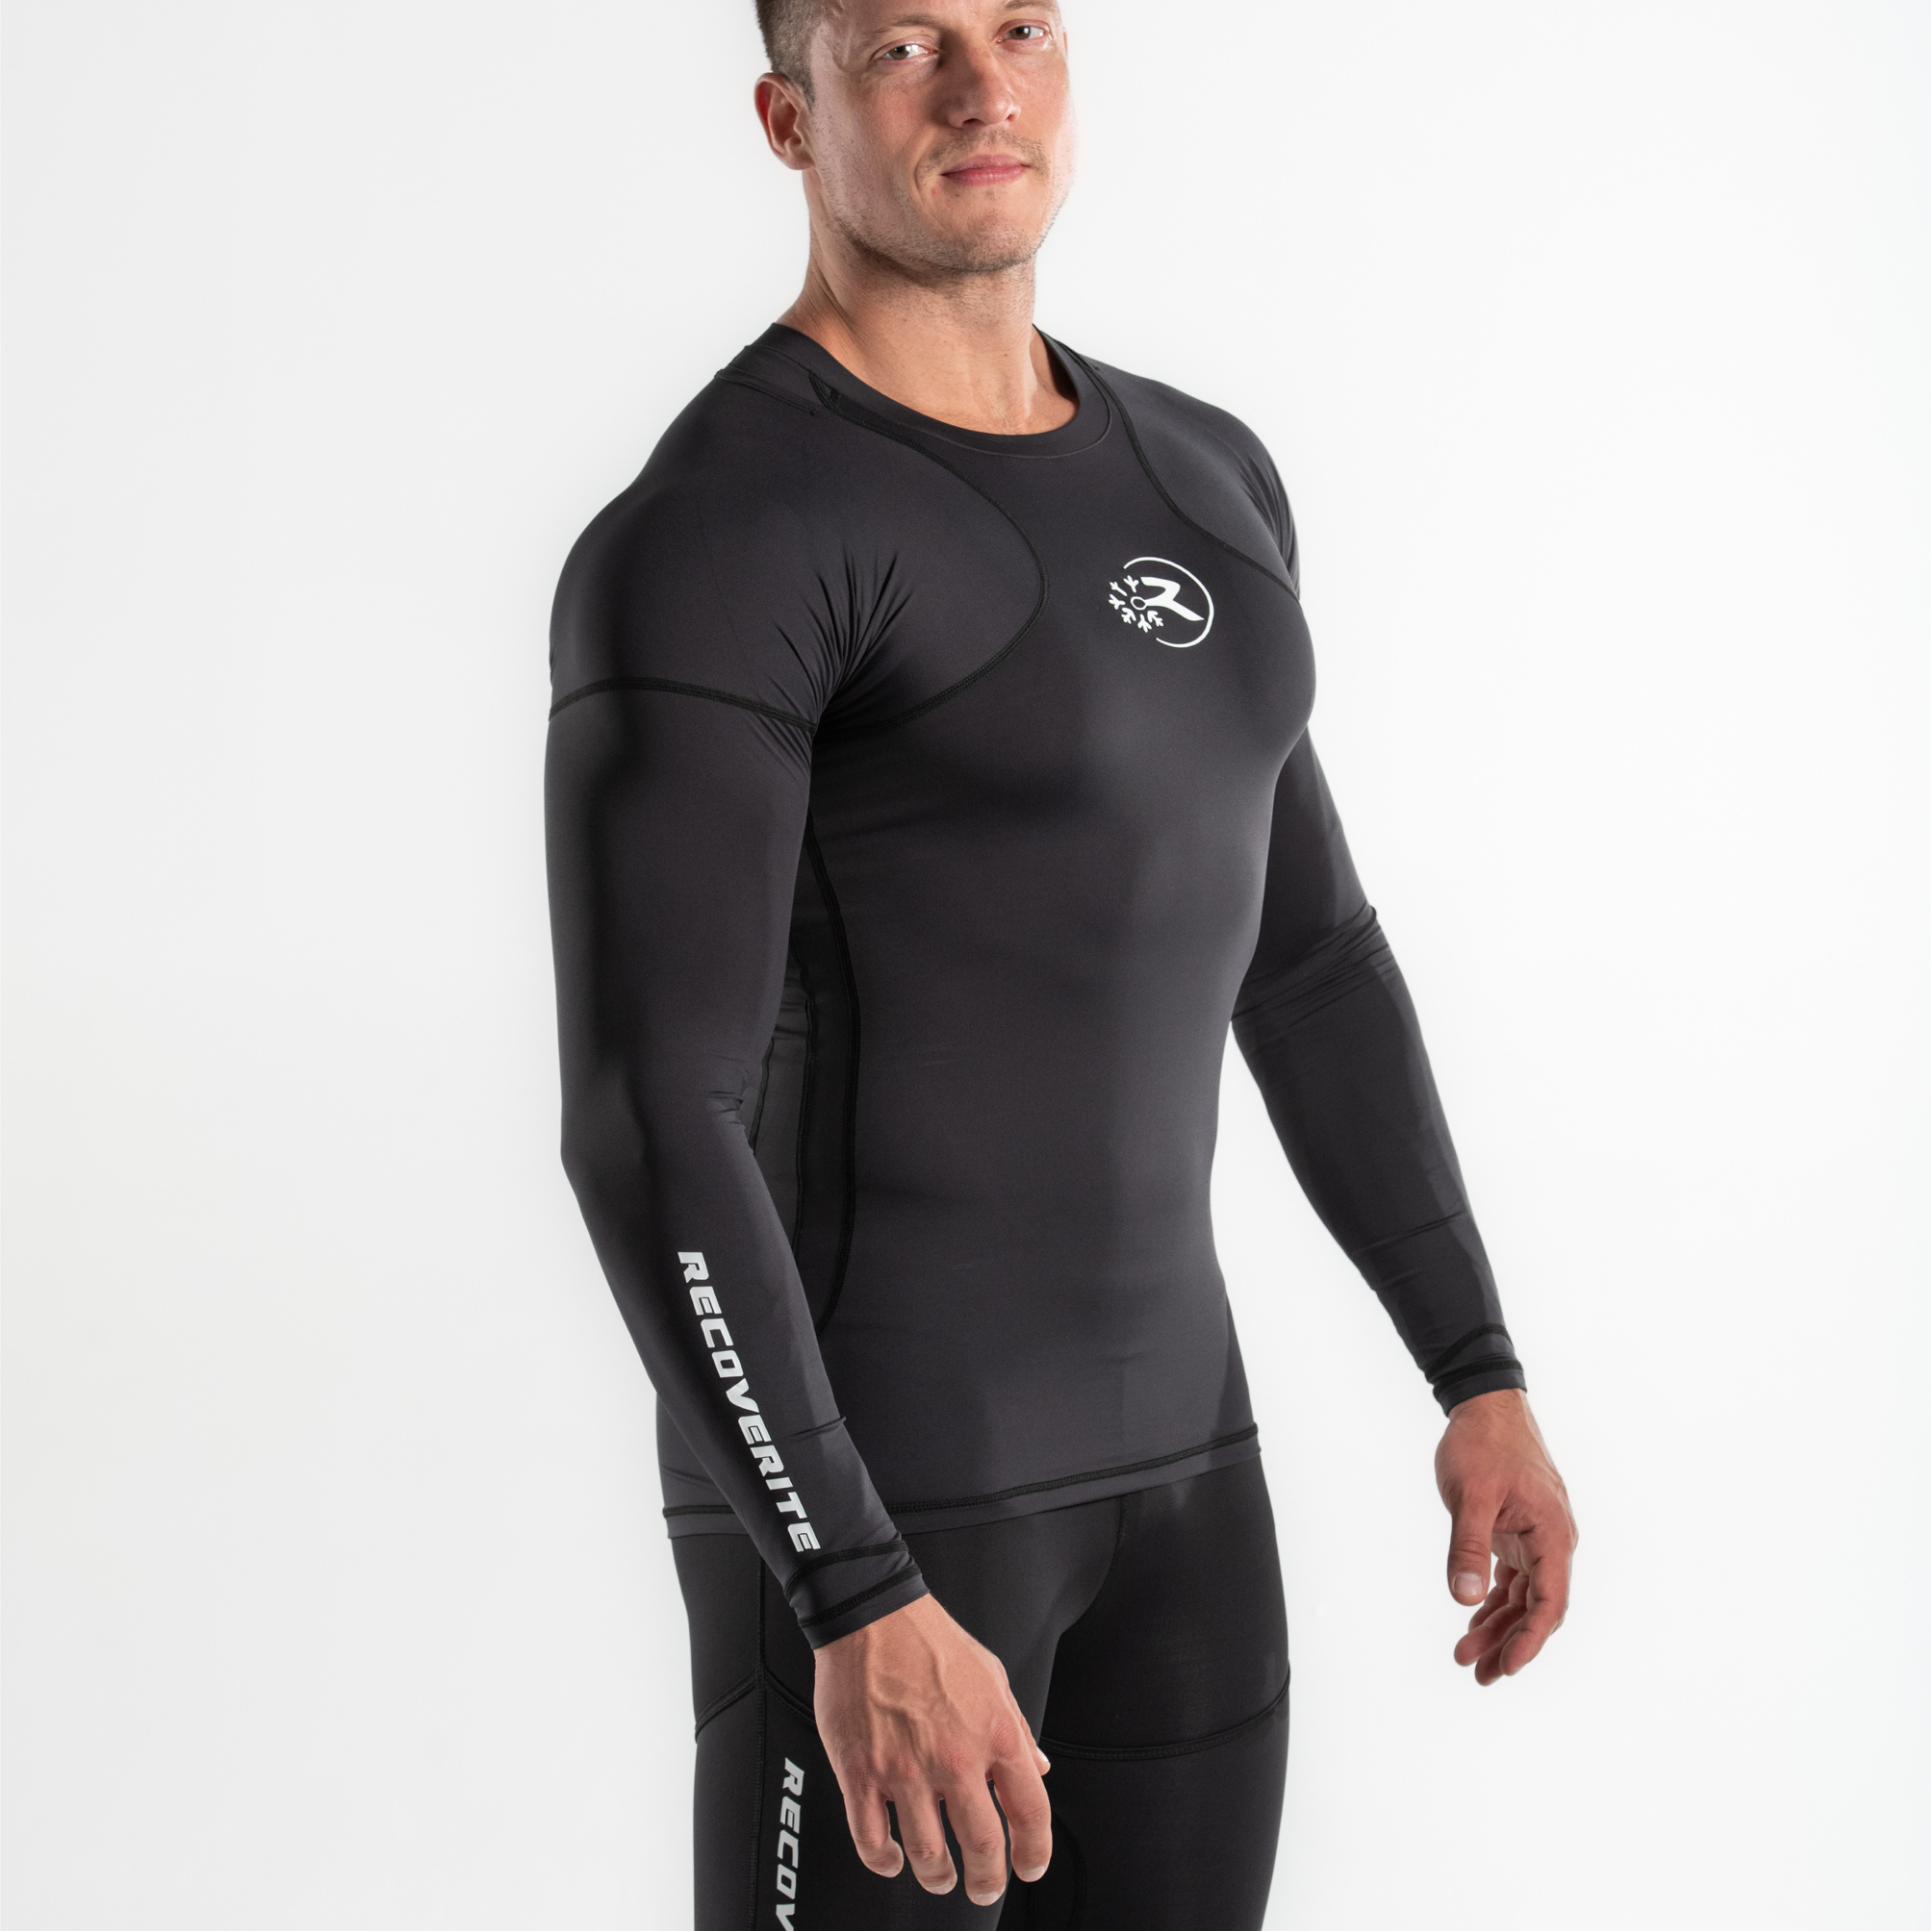 Shop Compression Wear for Recovery & Injury Prevention by